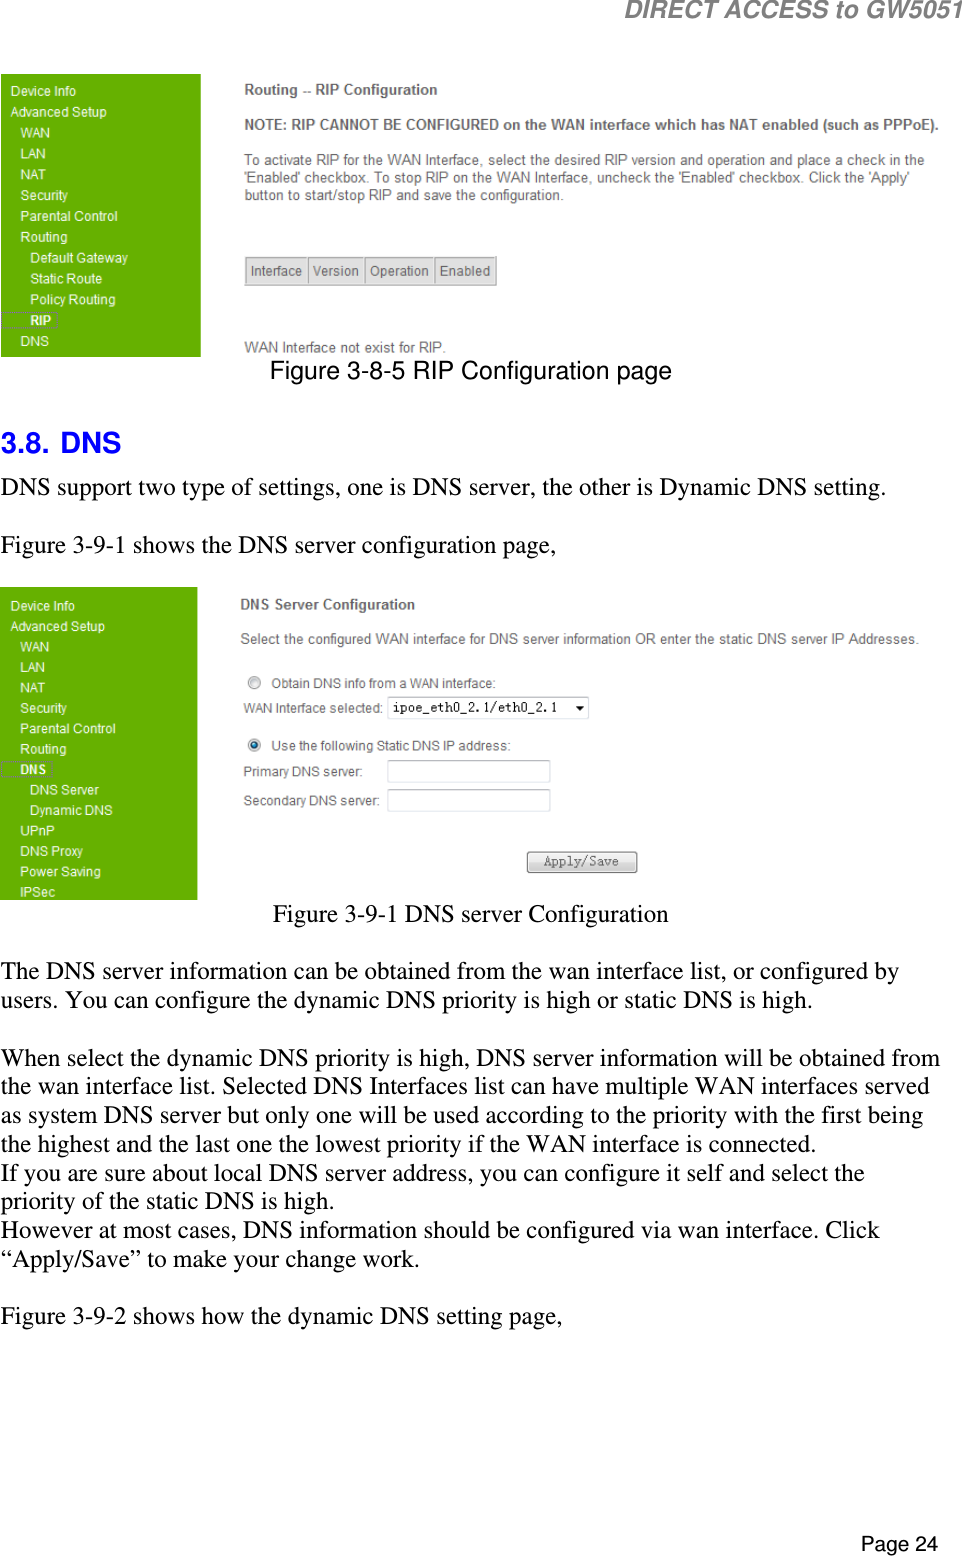                                                                                                                                                                                                                           DIRECT ACCESS to GW5051    Page 24   Figure 3-8-5 RIP Configuration page  3.8. DNS DNS support two type of settings, one is DNS server, the other is Dynamic DNS setting.  Figure 3-9-1 shows the DNS server configuration page,    Figure 3-9-1 DNS server Configuration  The DNS server information can be obtained from the wan interface list, or configured by users. You can configure the dynamic DNS priority is high or static DNS is high.  When select the dynamic DNS priority is high, DNS server information will be obtained from the wan interface list. Selected DNS Interfaces list can have multiple WAN interfaces served as system DNS server but only one will be used according to the priority with the first being the highest and the last one the lowest priority if the WAN interface is connected. If you are sure about local DNS server address, you can configure it self and select the priority of the static DNS is high.  However at most cases, DNS information should be configured via wan interface. Click “Apply/Save” to make your change work.  Figure 3-9-2 shows how the dynamic DNS setting page,   